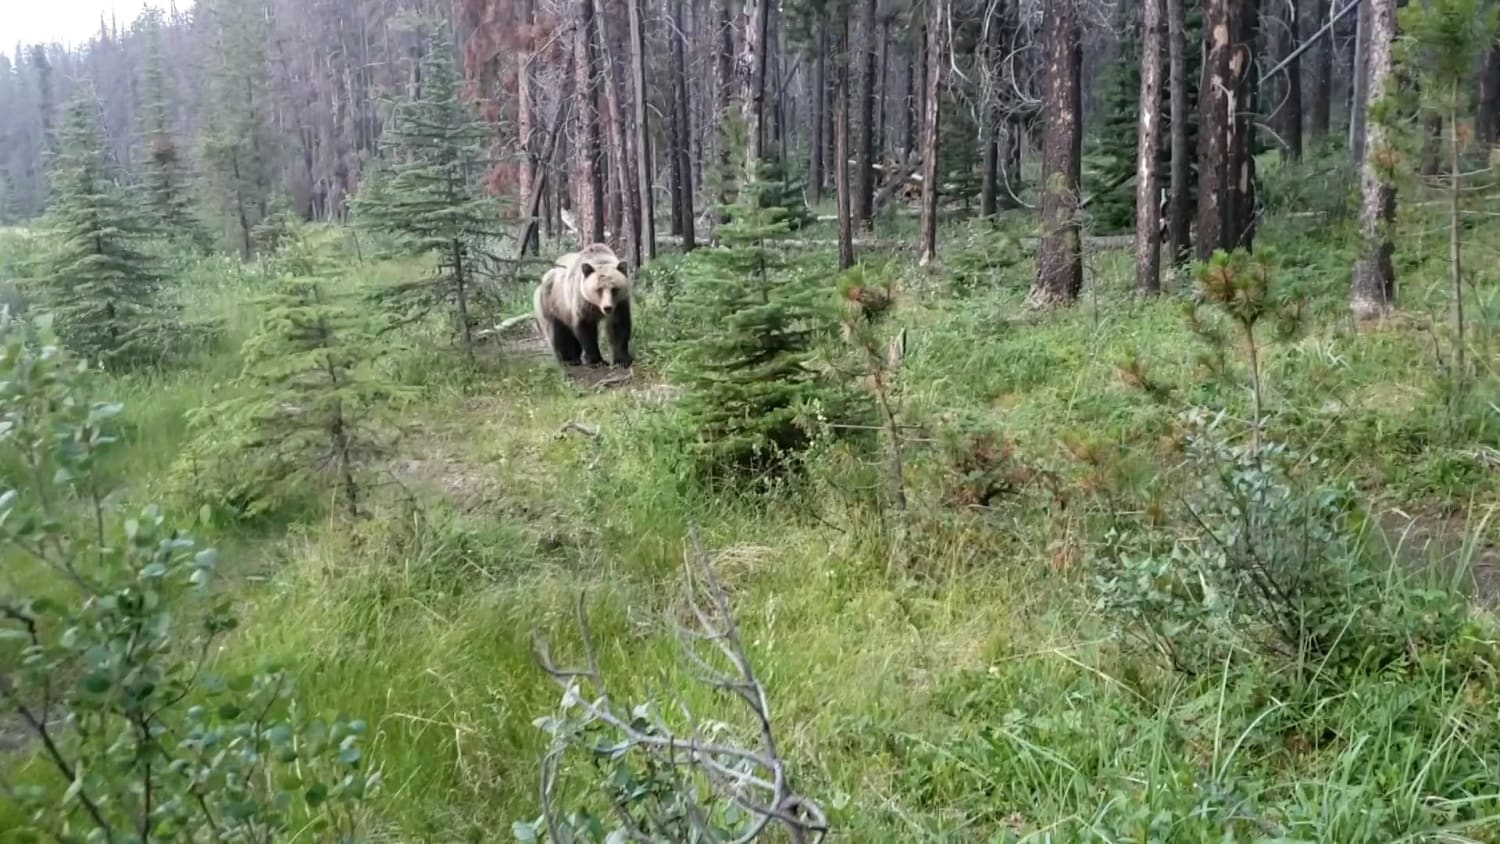 Came across a grizzly bear last night on the Hochimini trail in Jasper, AB. Luckily she just wanted to get by and had no interest in me.